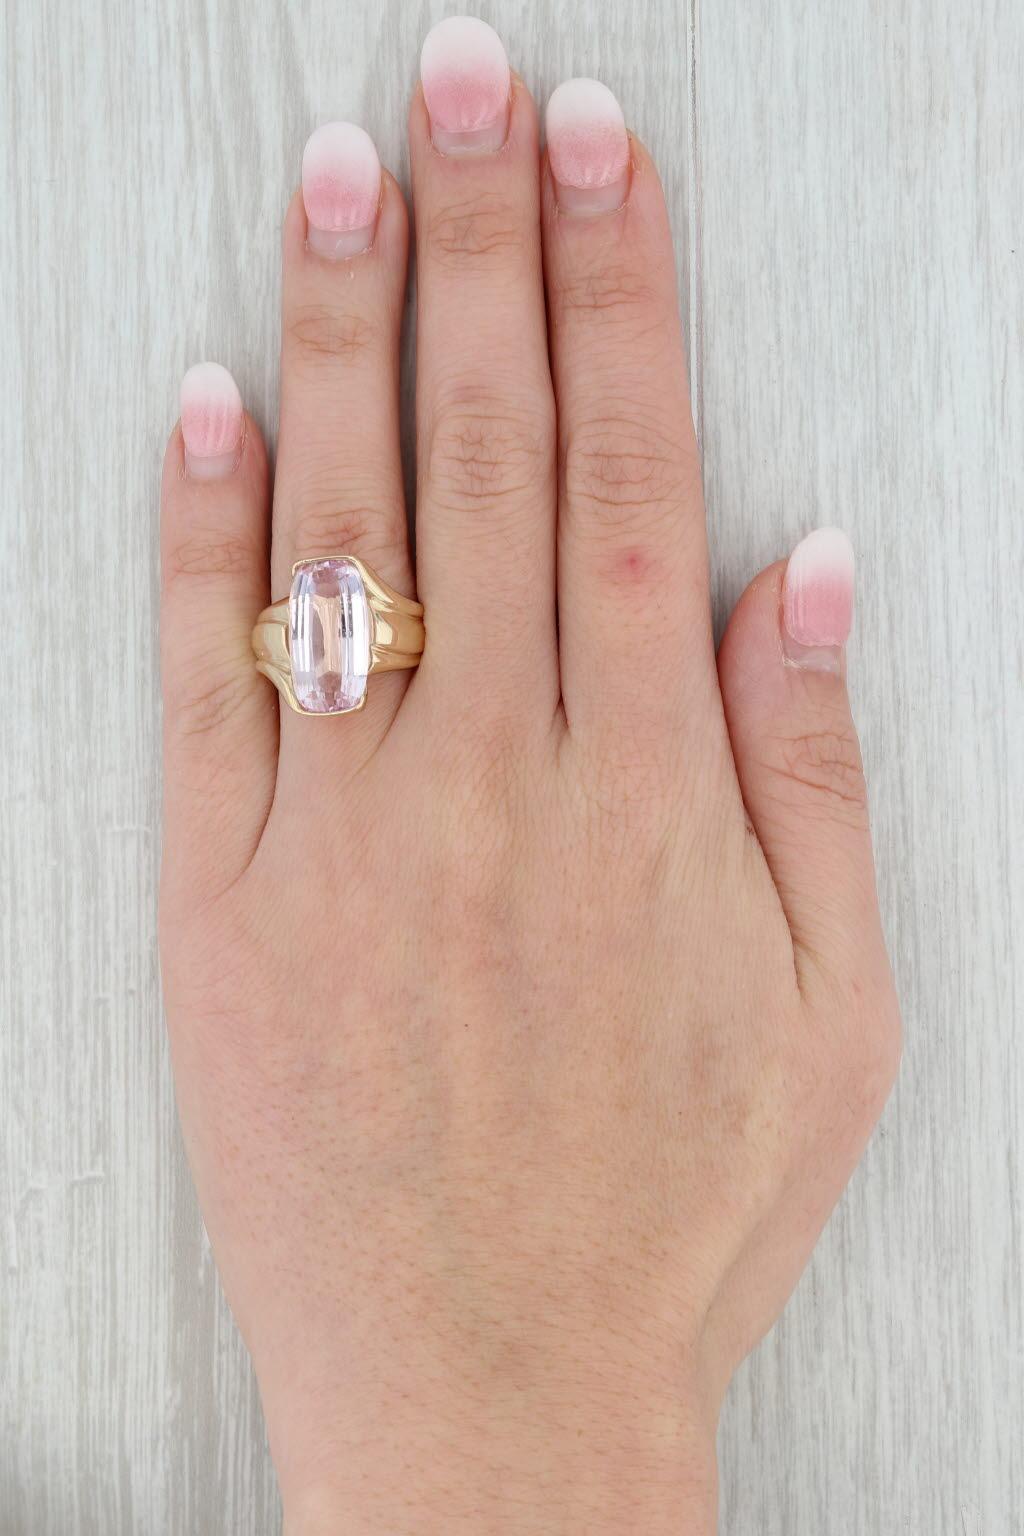 Pink Kunzite Solitaire Ring 14k Yellow Gold Size 5.75 Cocktail For Sale 4